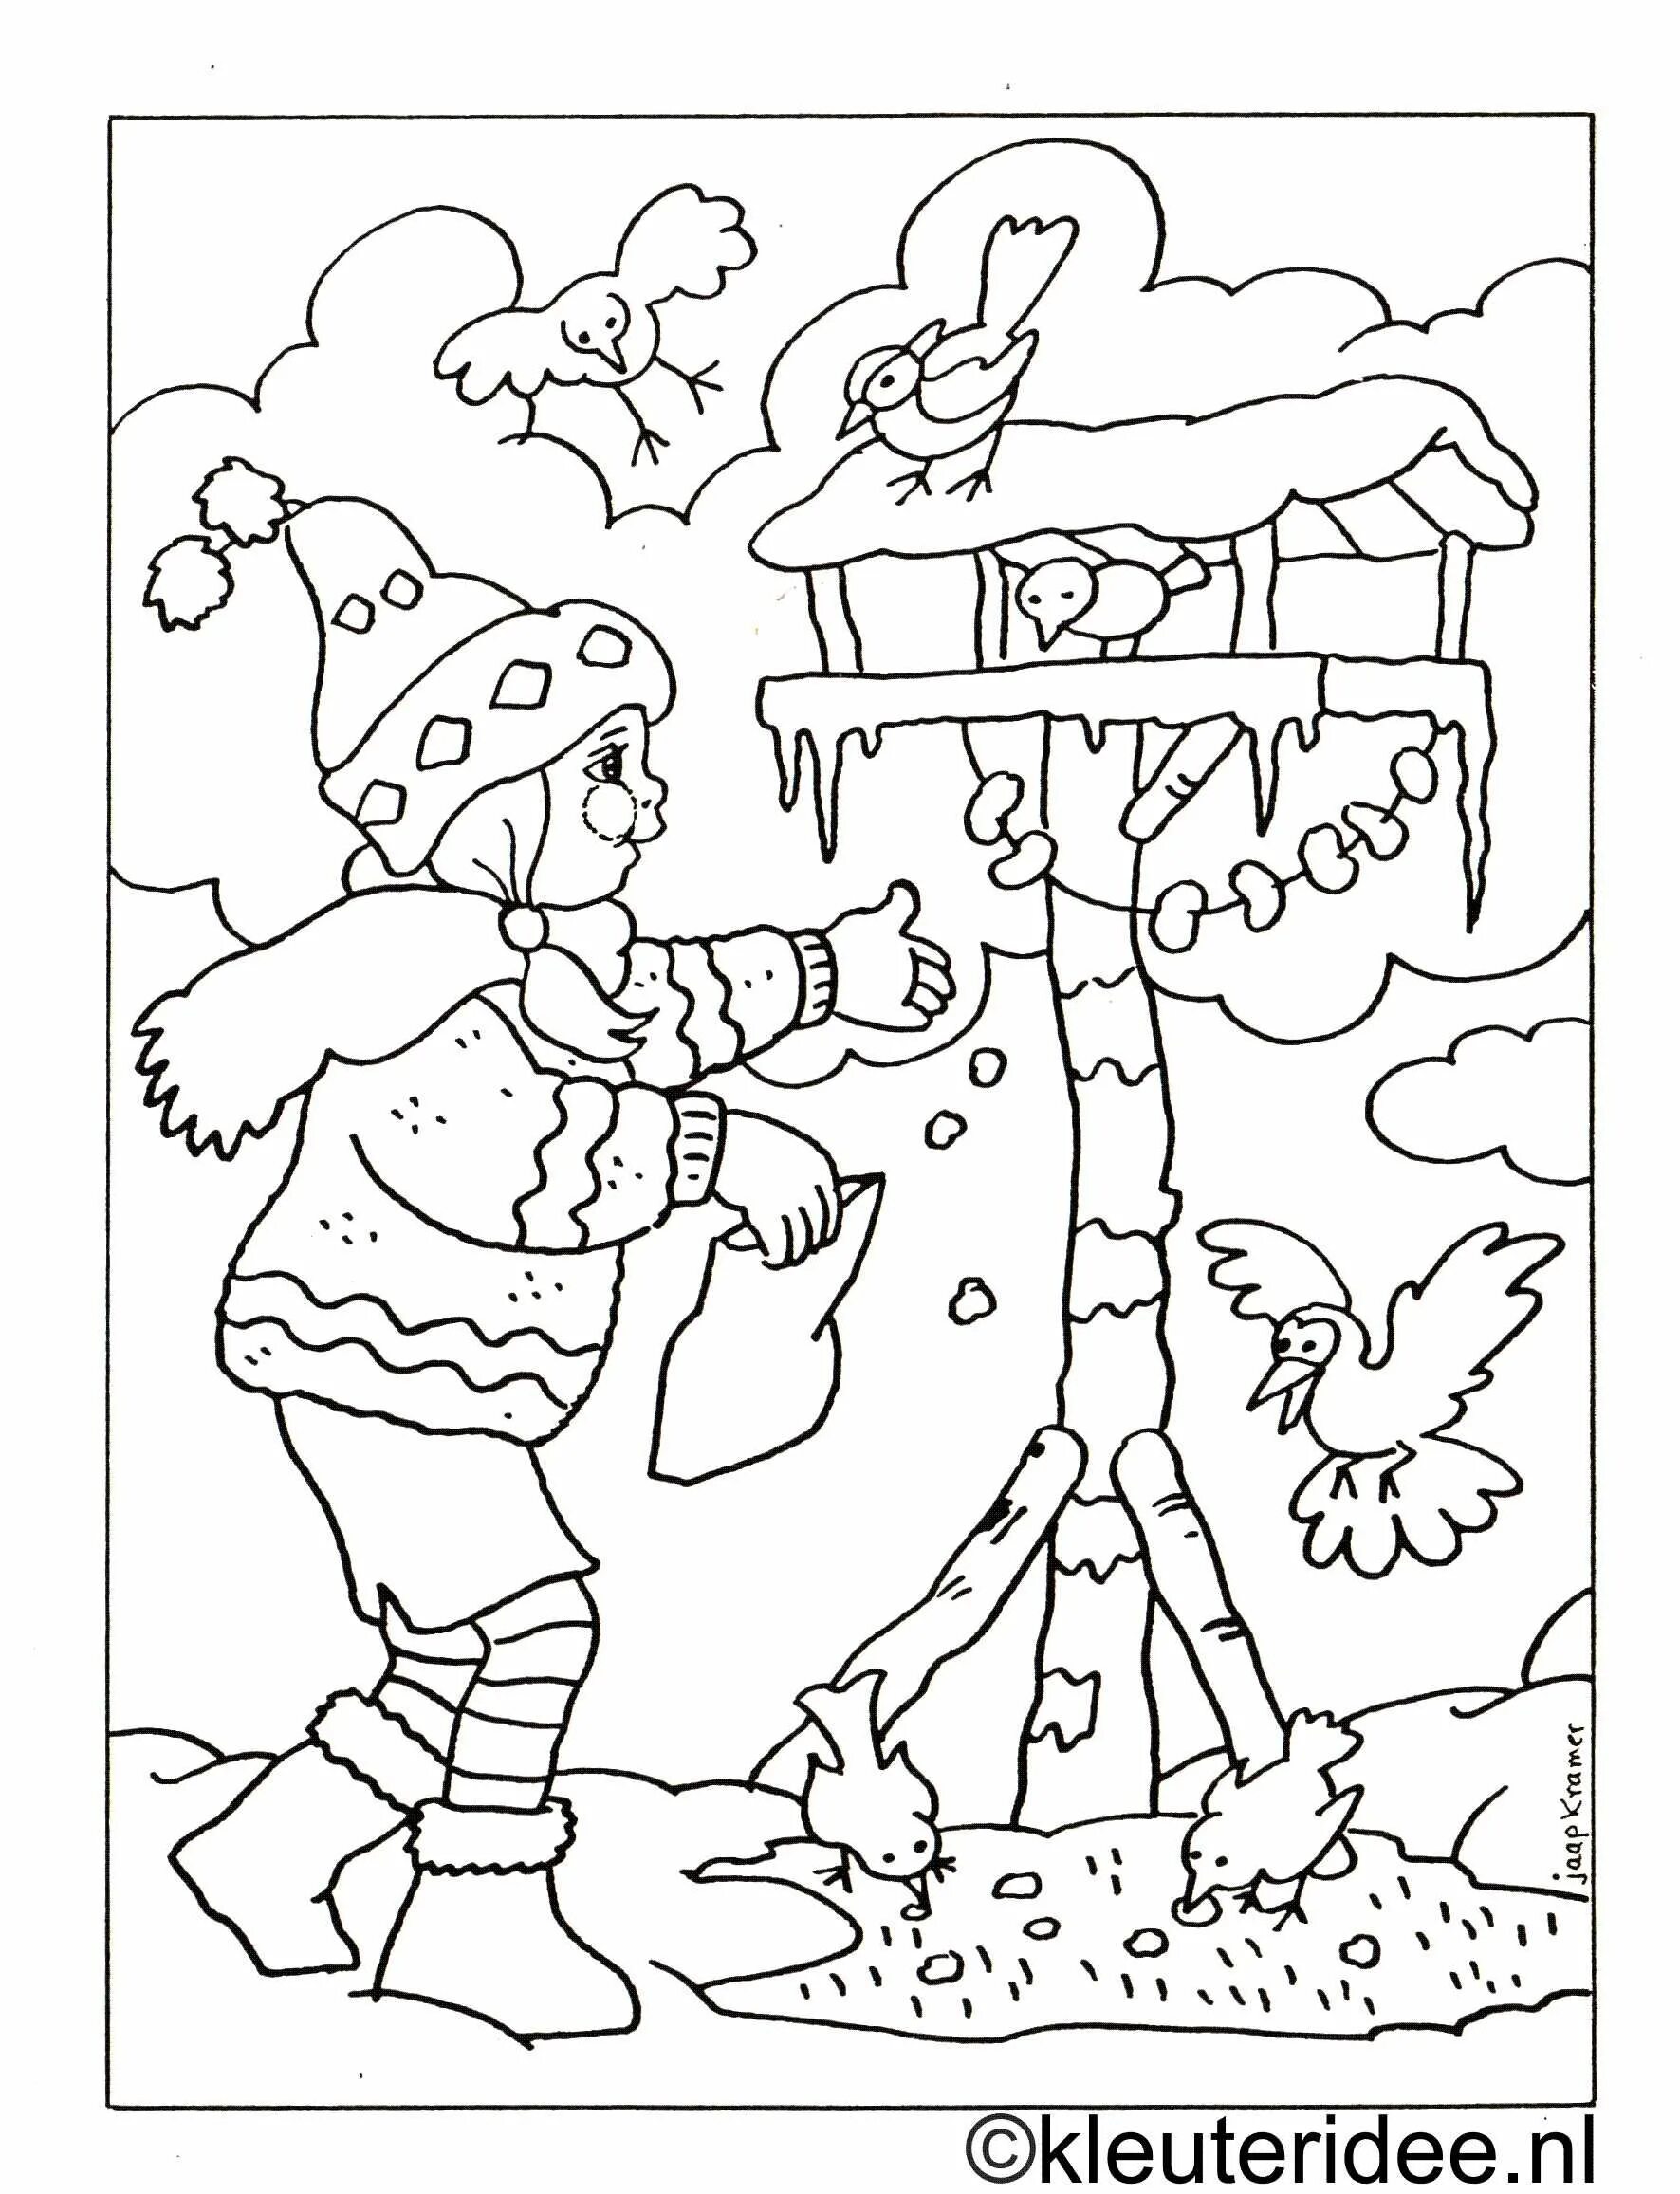 Gorgeous bird feeder coloring book for 4-5 year olds